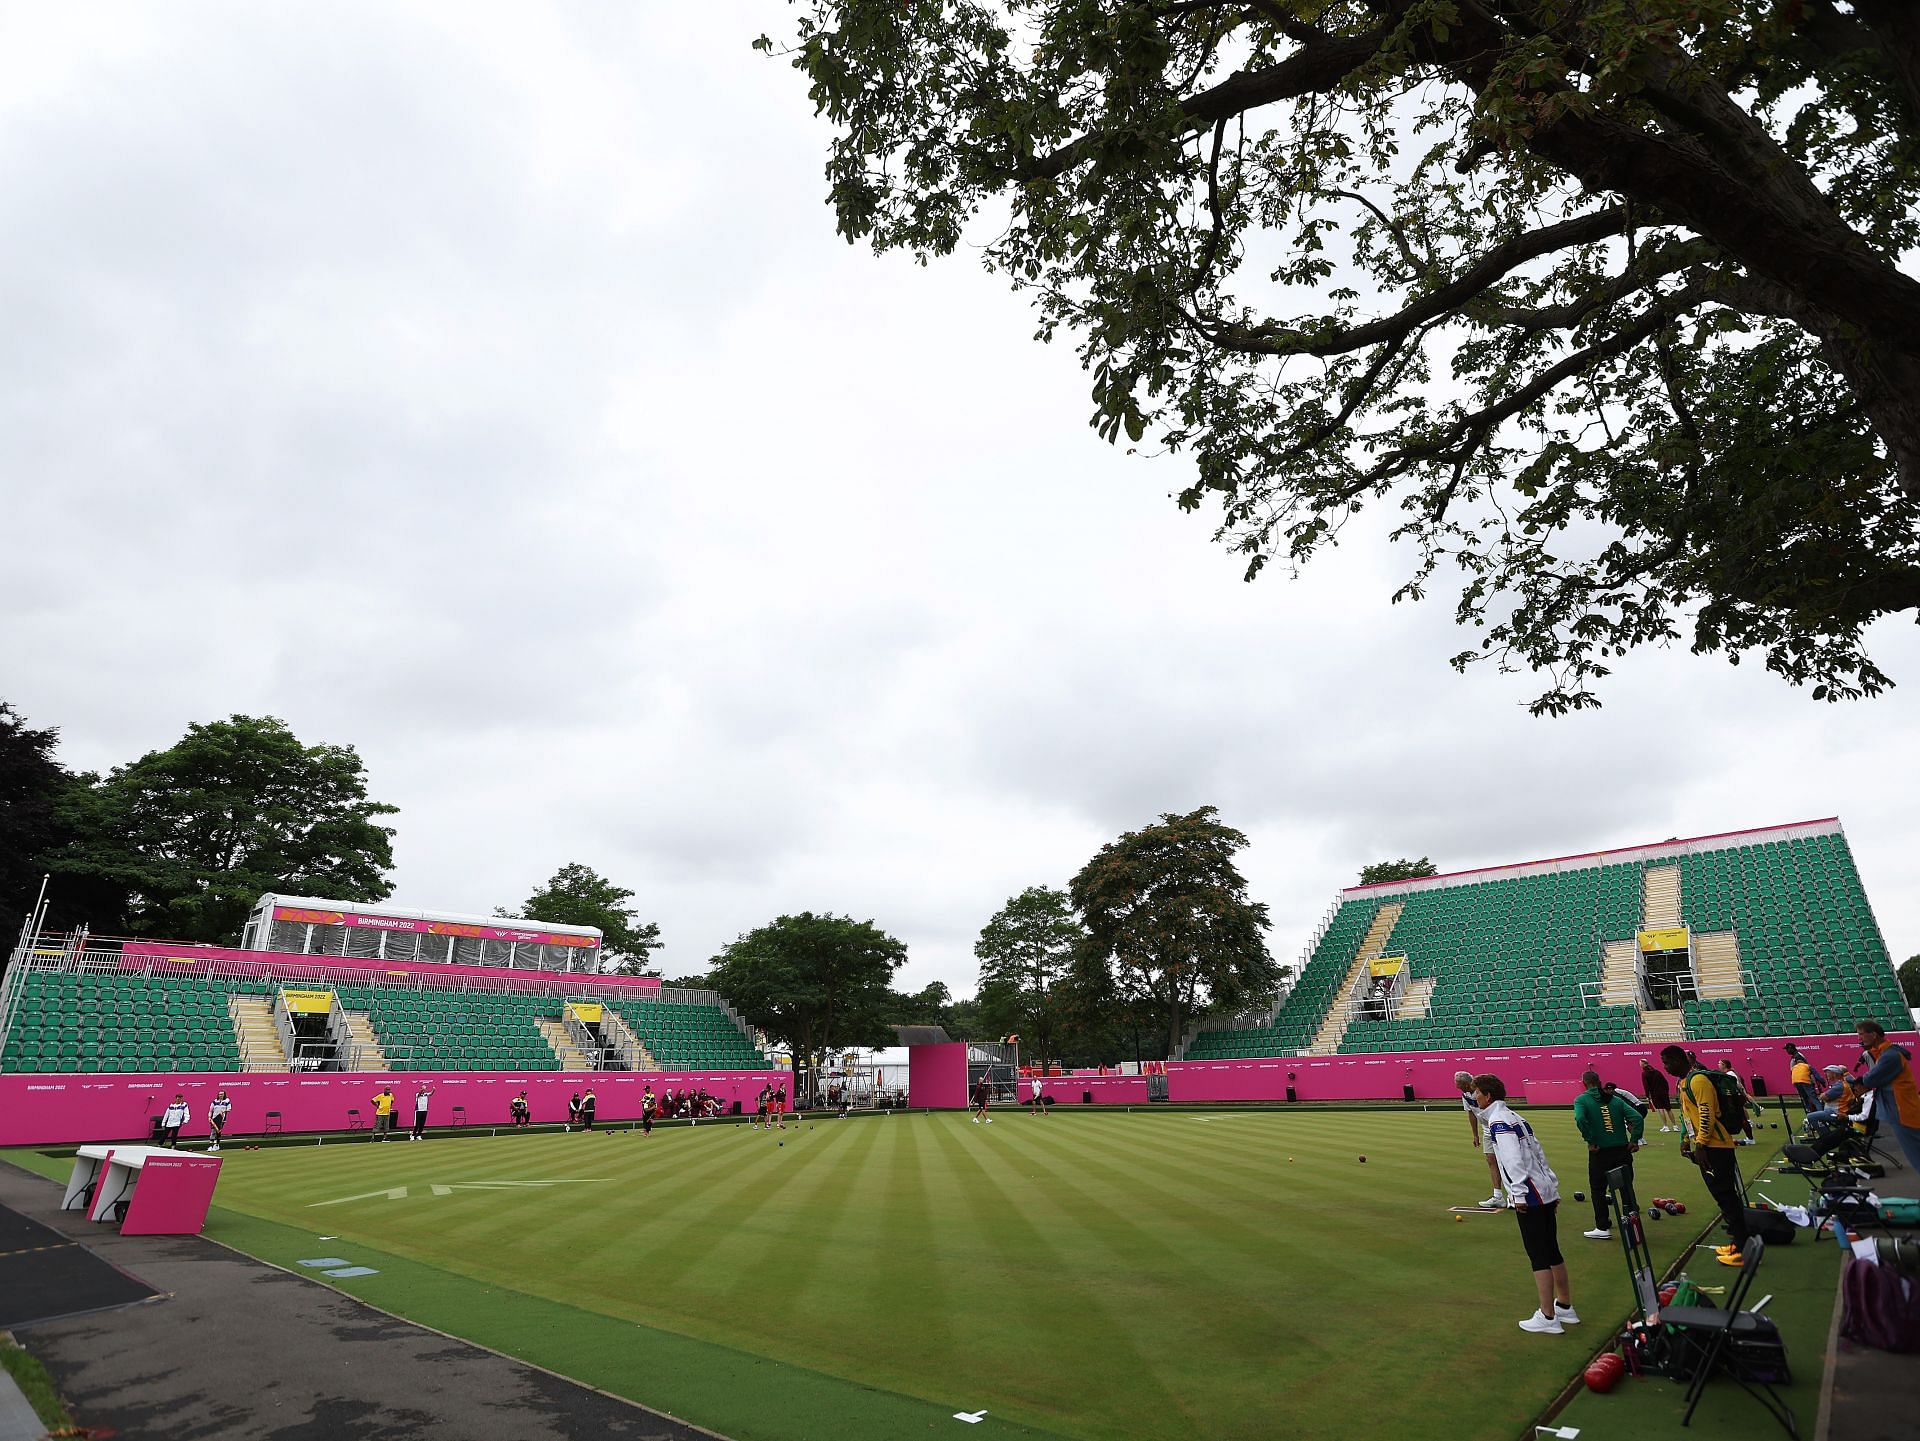 Previews - A general view of Victoria Park, venue for Lawn bowls as teams practice ahead of the Birmingham 2022 Commonwealth Games at Victoria Park